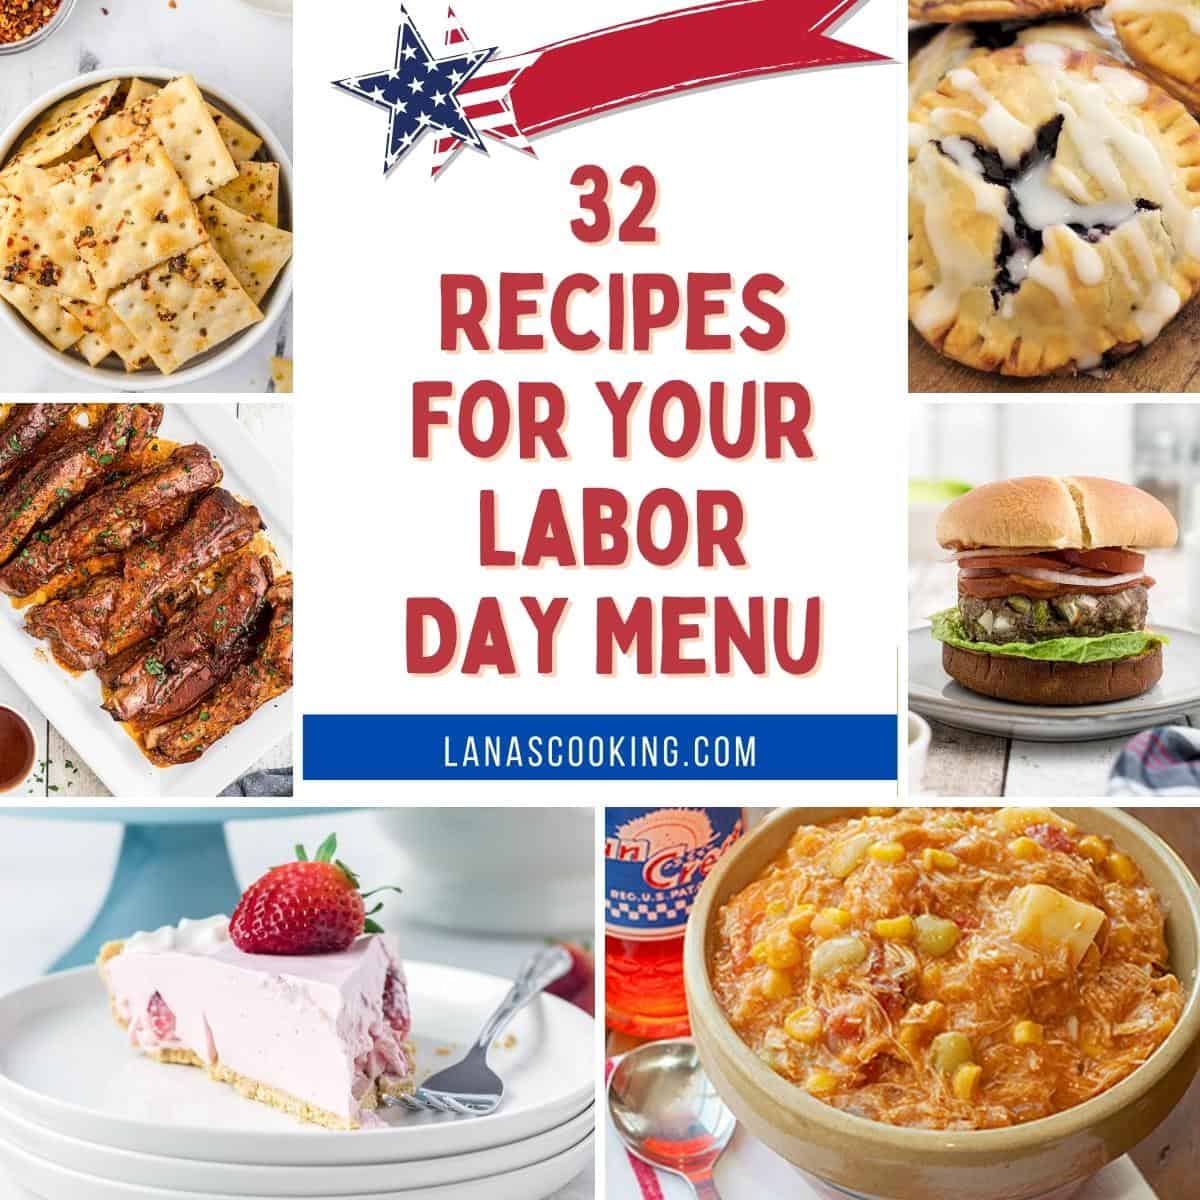 32 Recipes For Your Labor Day Menu